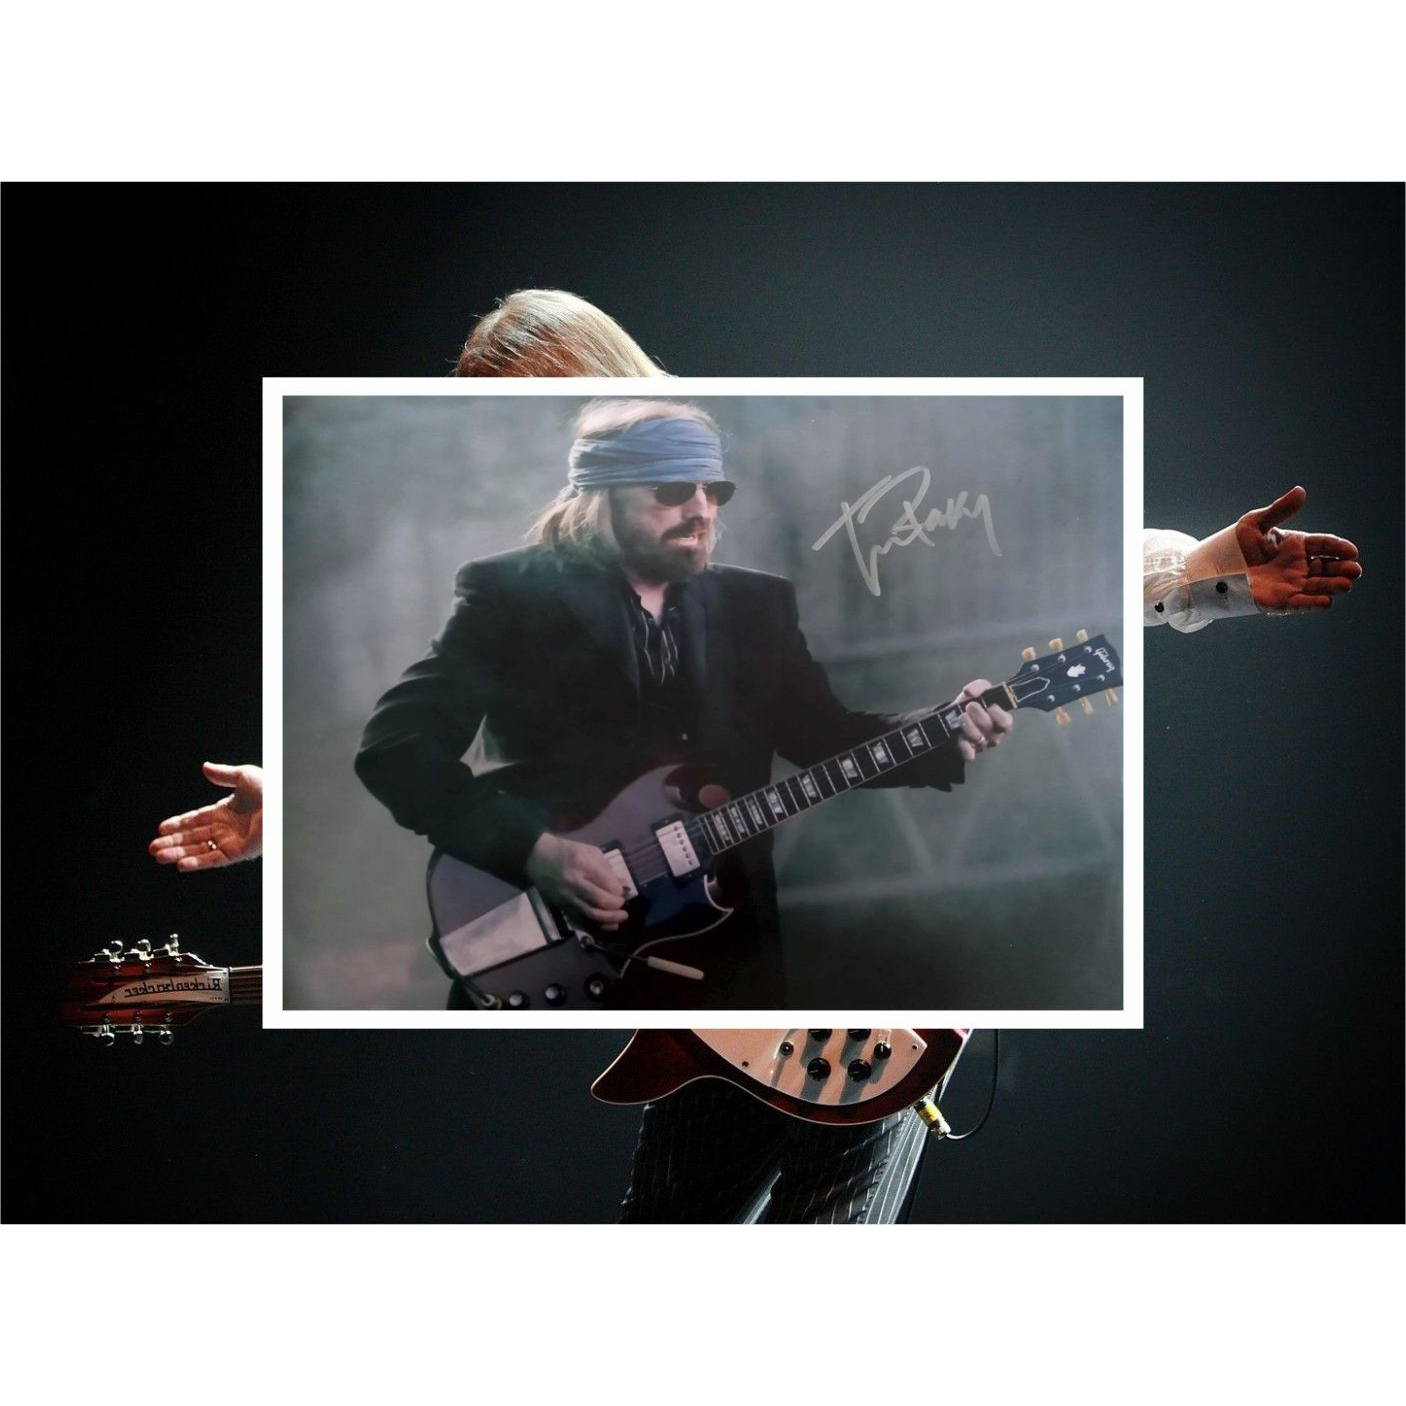 Tom Petty 8 by 10 photo signed with proof